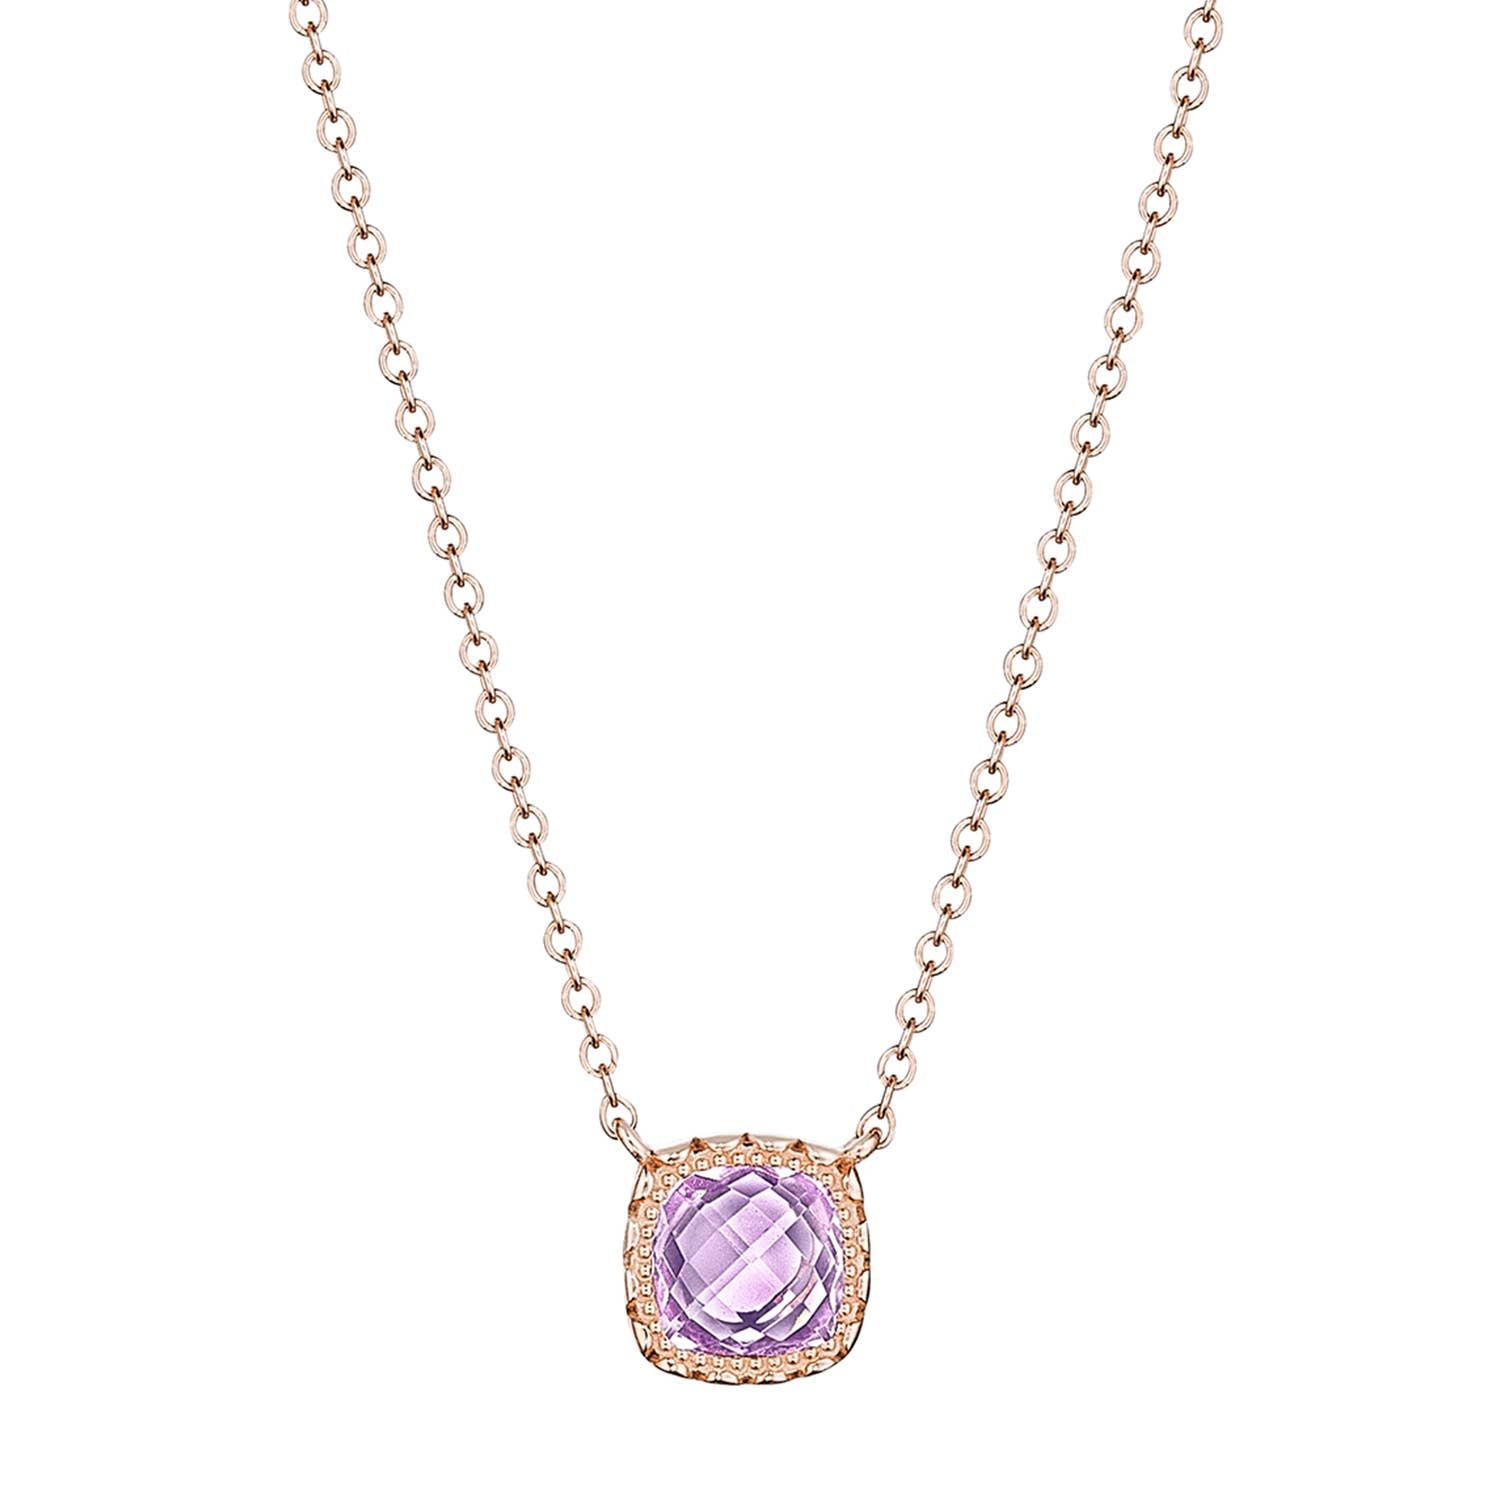 Petite Cushion Gem Necklace with Rose Amethyst